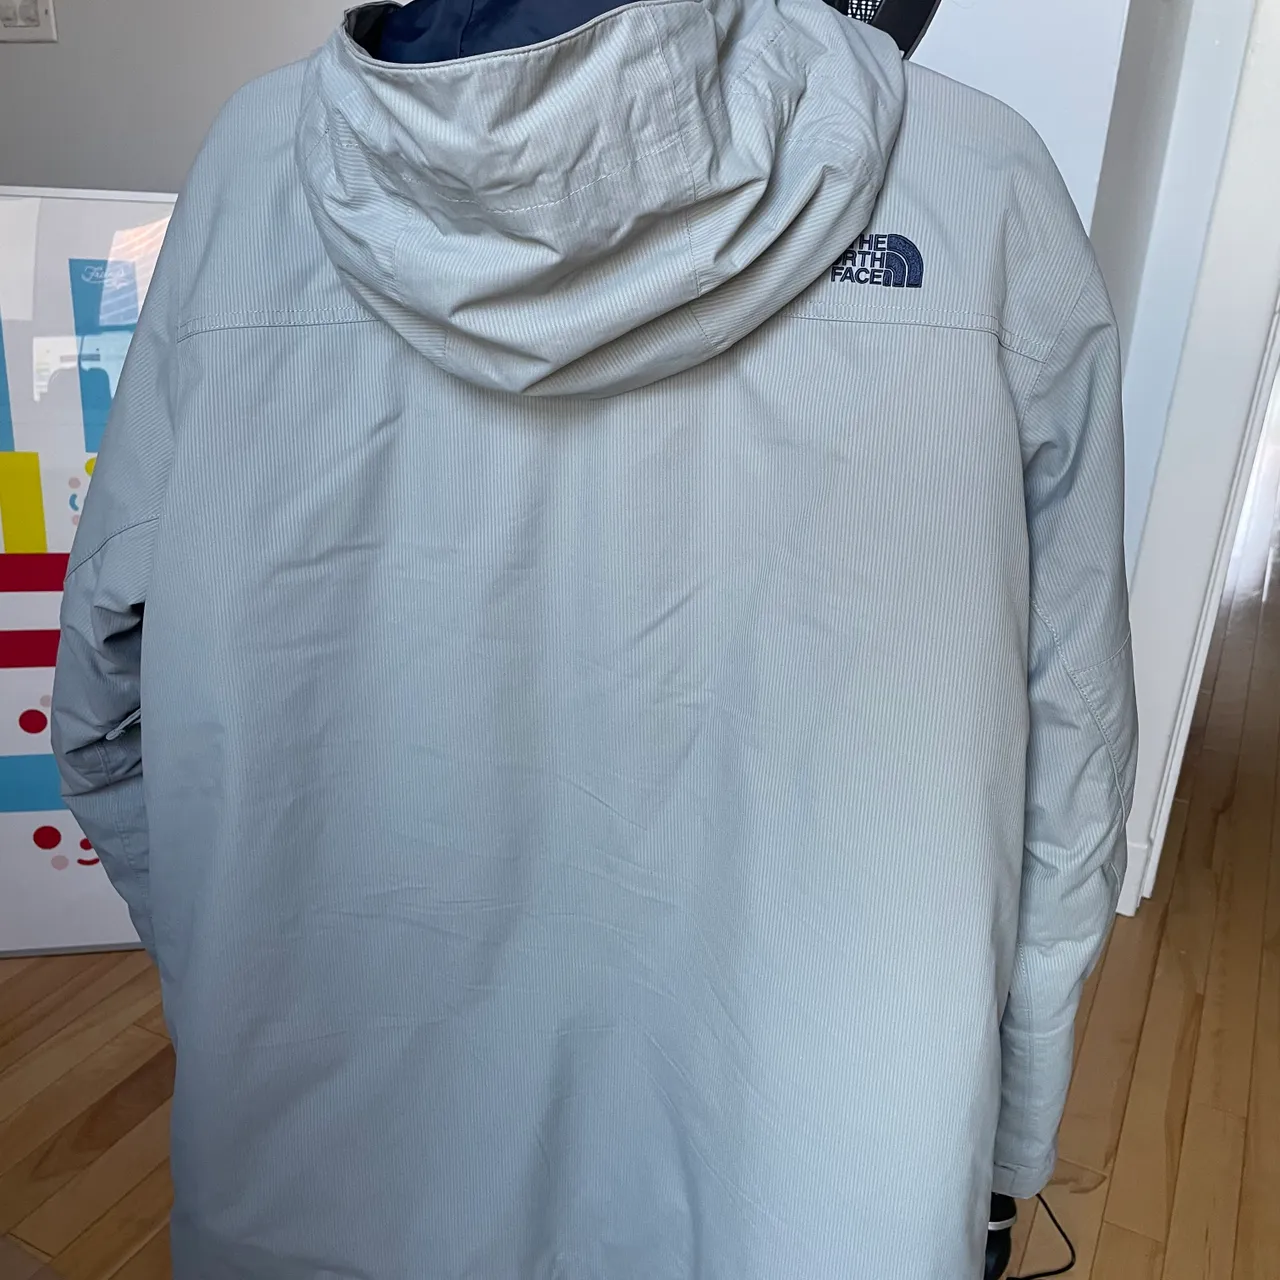 North Face Triclimate Jacket photo 1